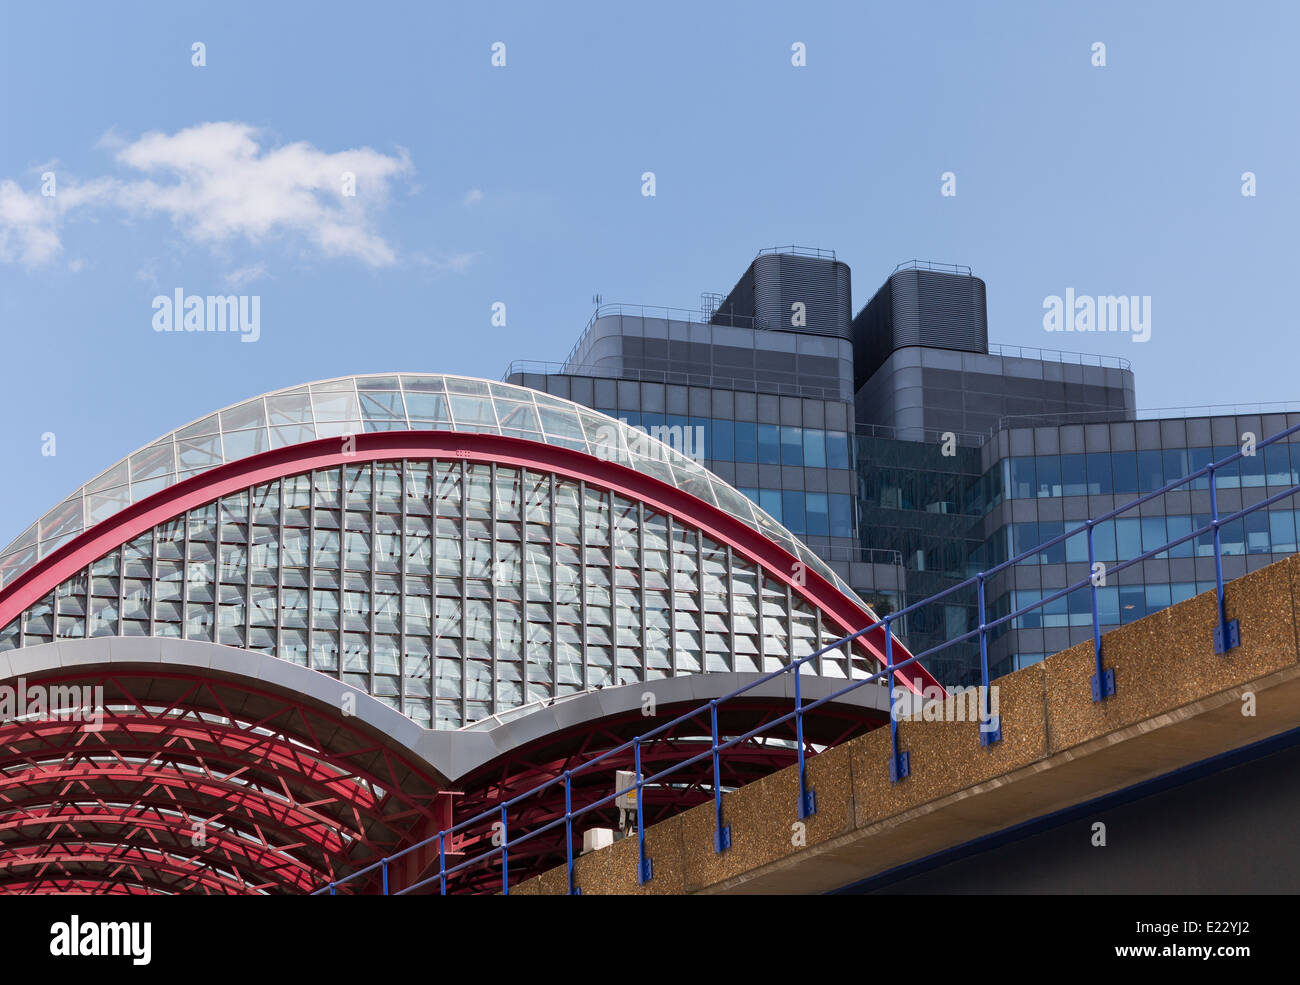 Canopy of Docklands Light Railway station Stock Photo